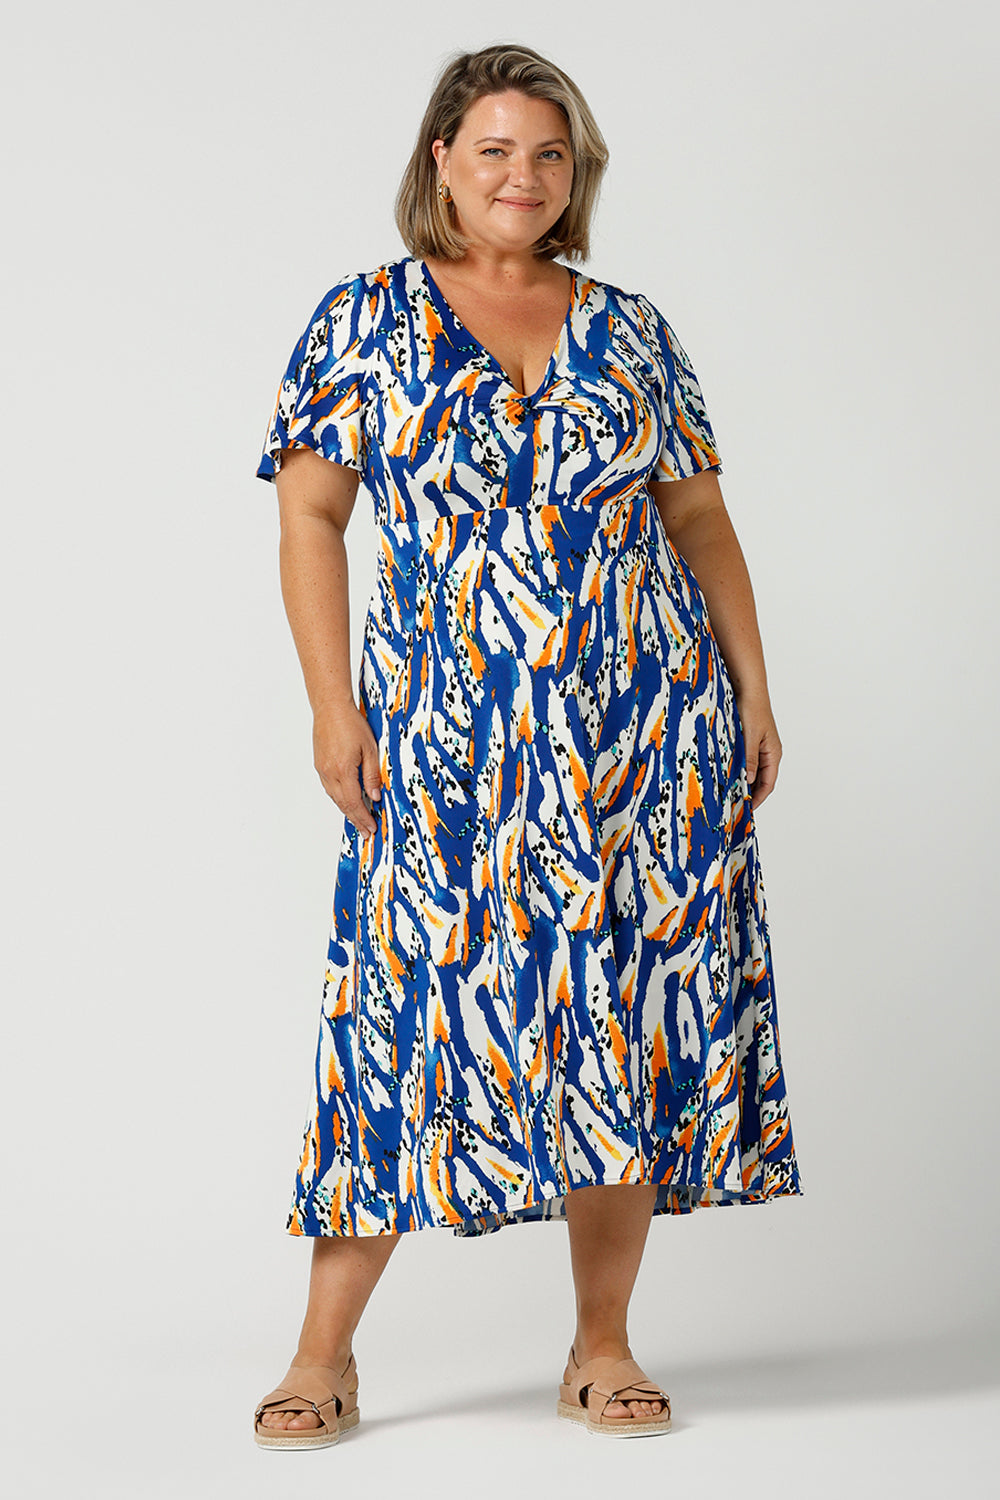 A plus size, size 18 woman wears a casual slinky jersey midi dress in an abstract print. The dress has short flutter sleeves, a double layer twist front bodice and an asymmetrical skirt - this is a great dress for weekend and travel style.